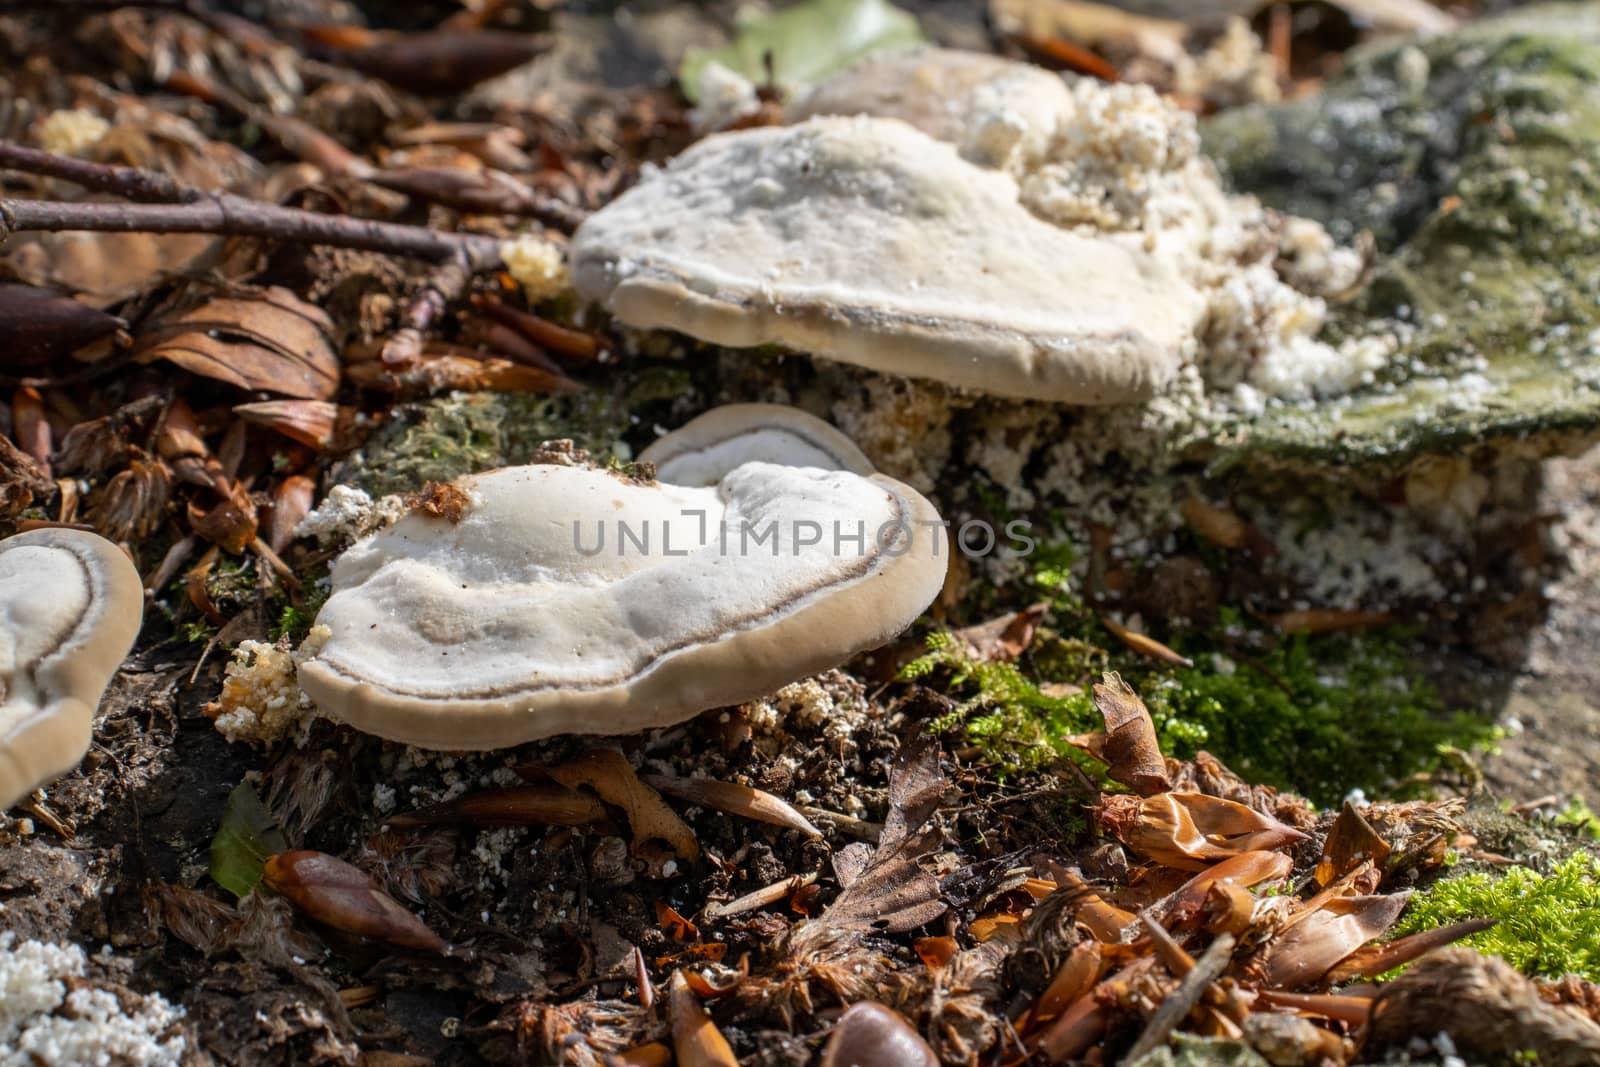 white woody mushroom, mushrooms coming out of a tree trunk in the forest.